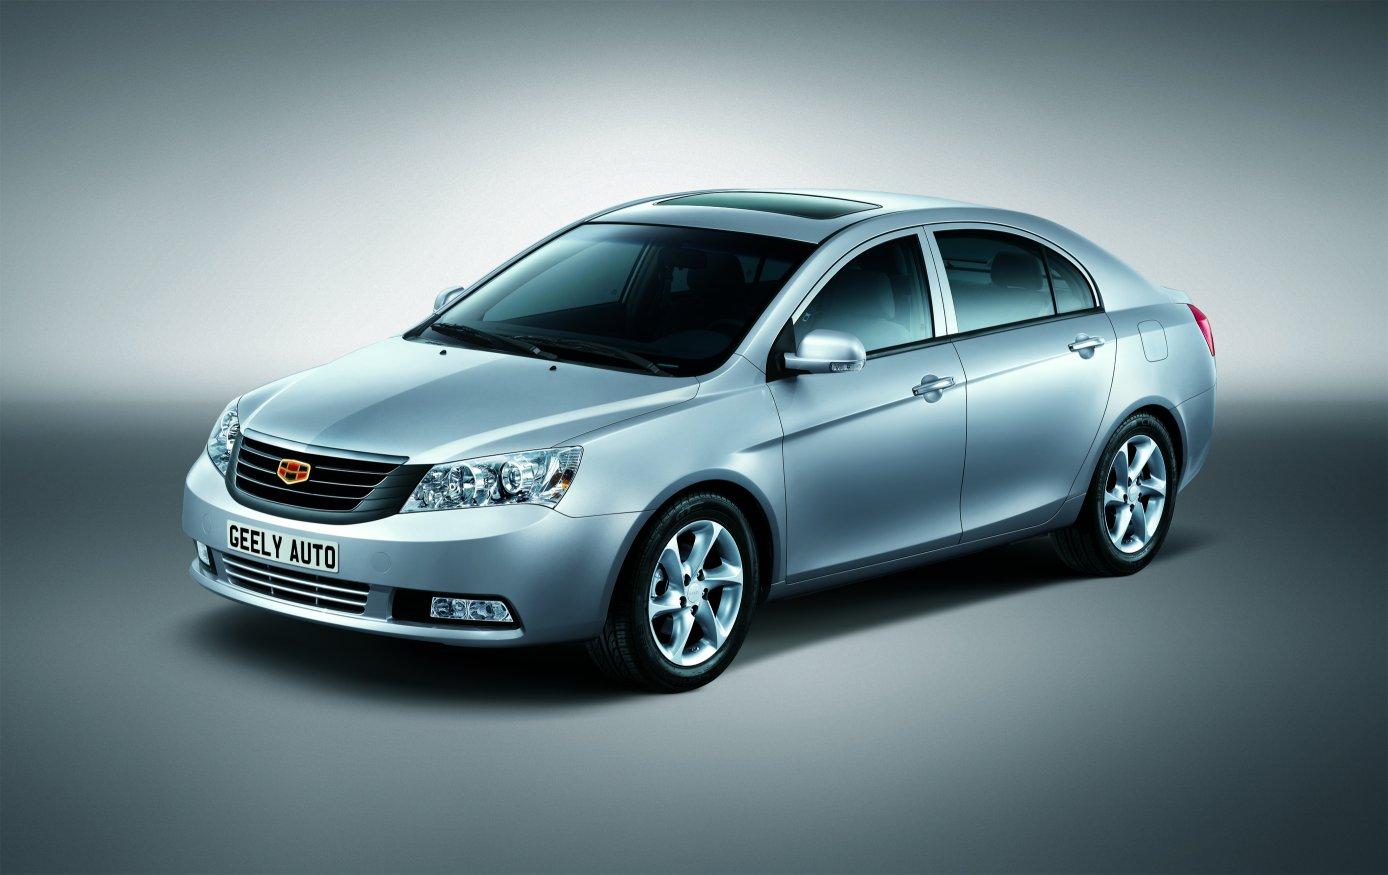 Cool Car Wallpaper: Geely Cars 2013